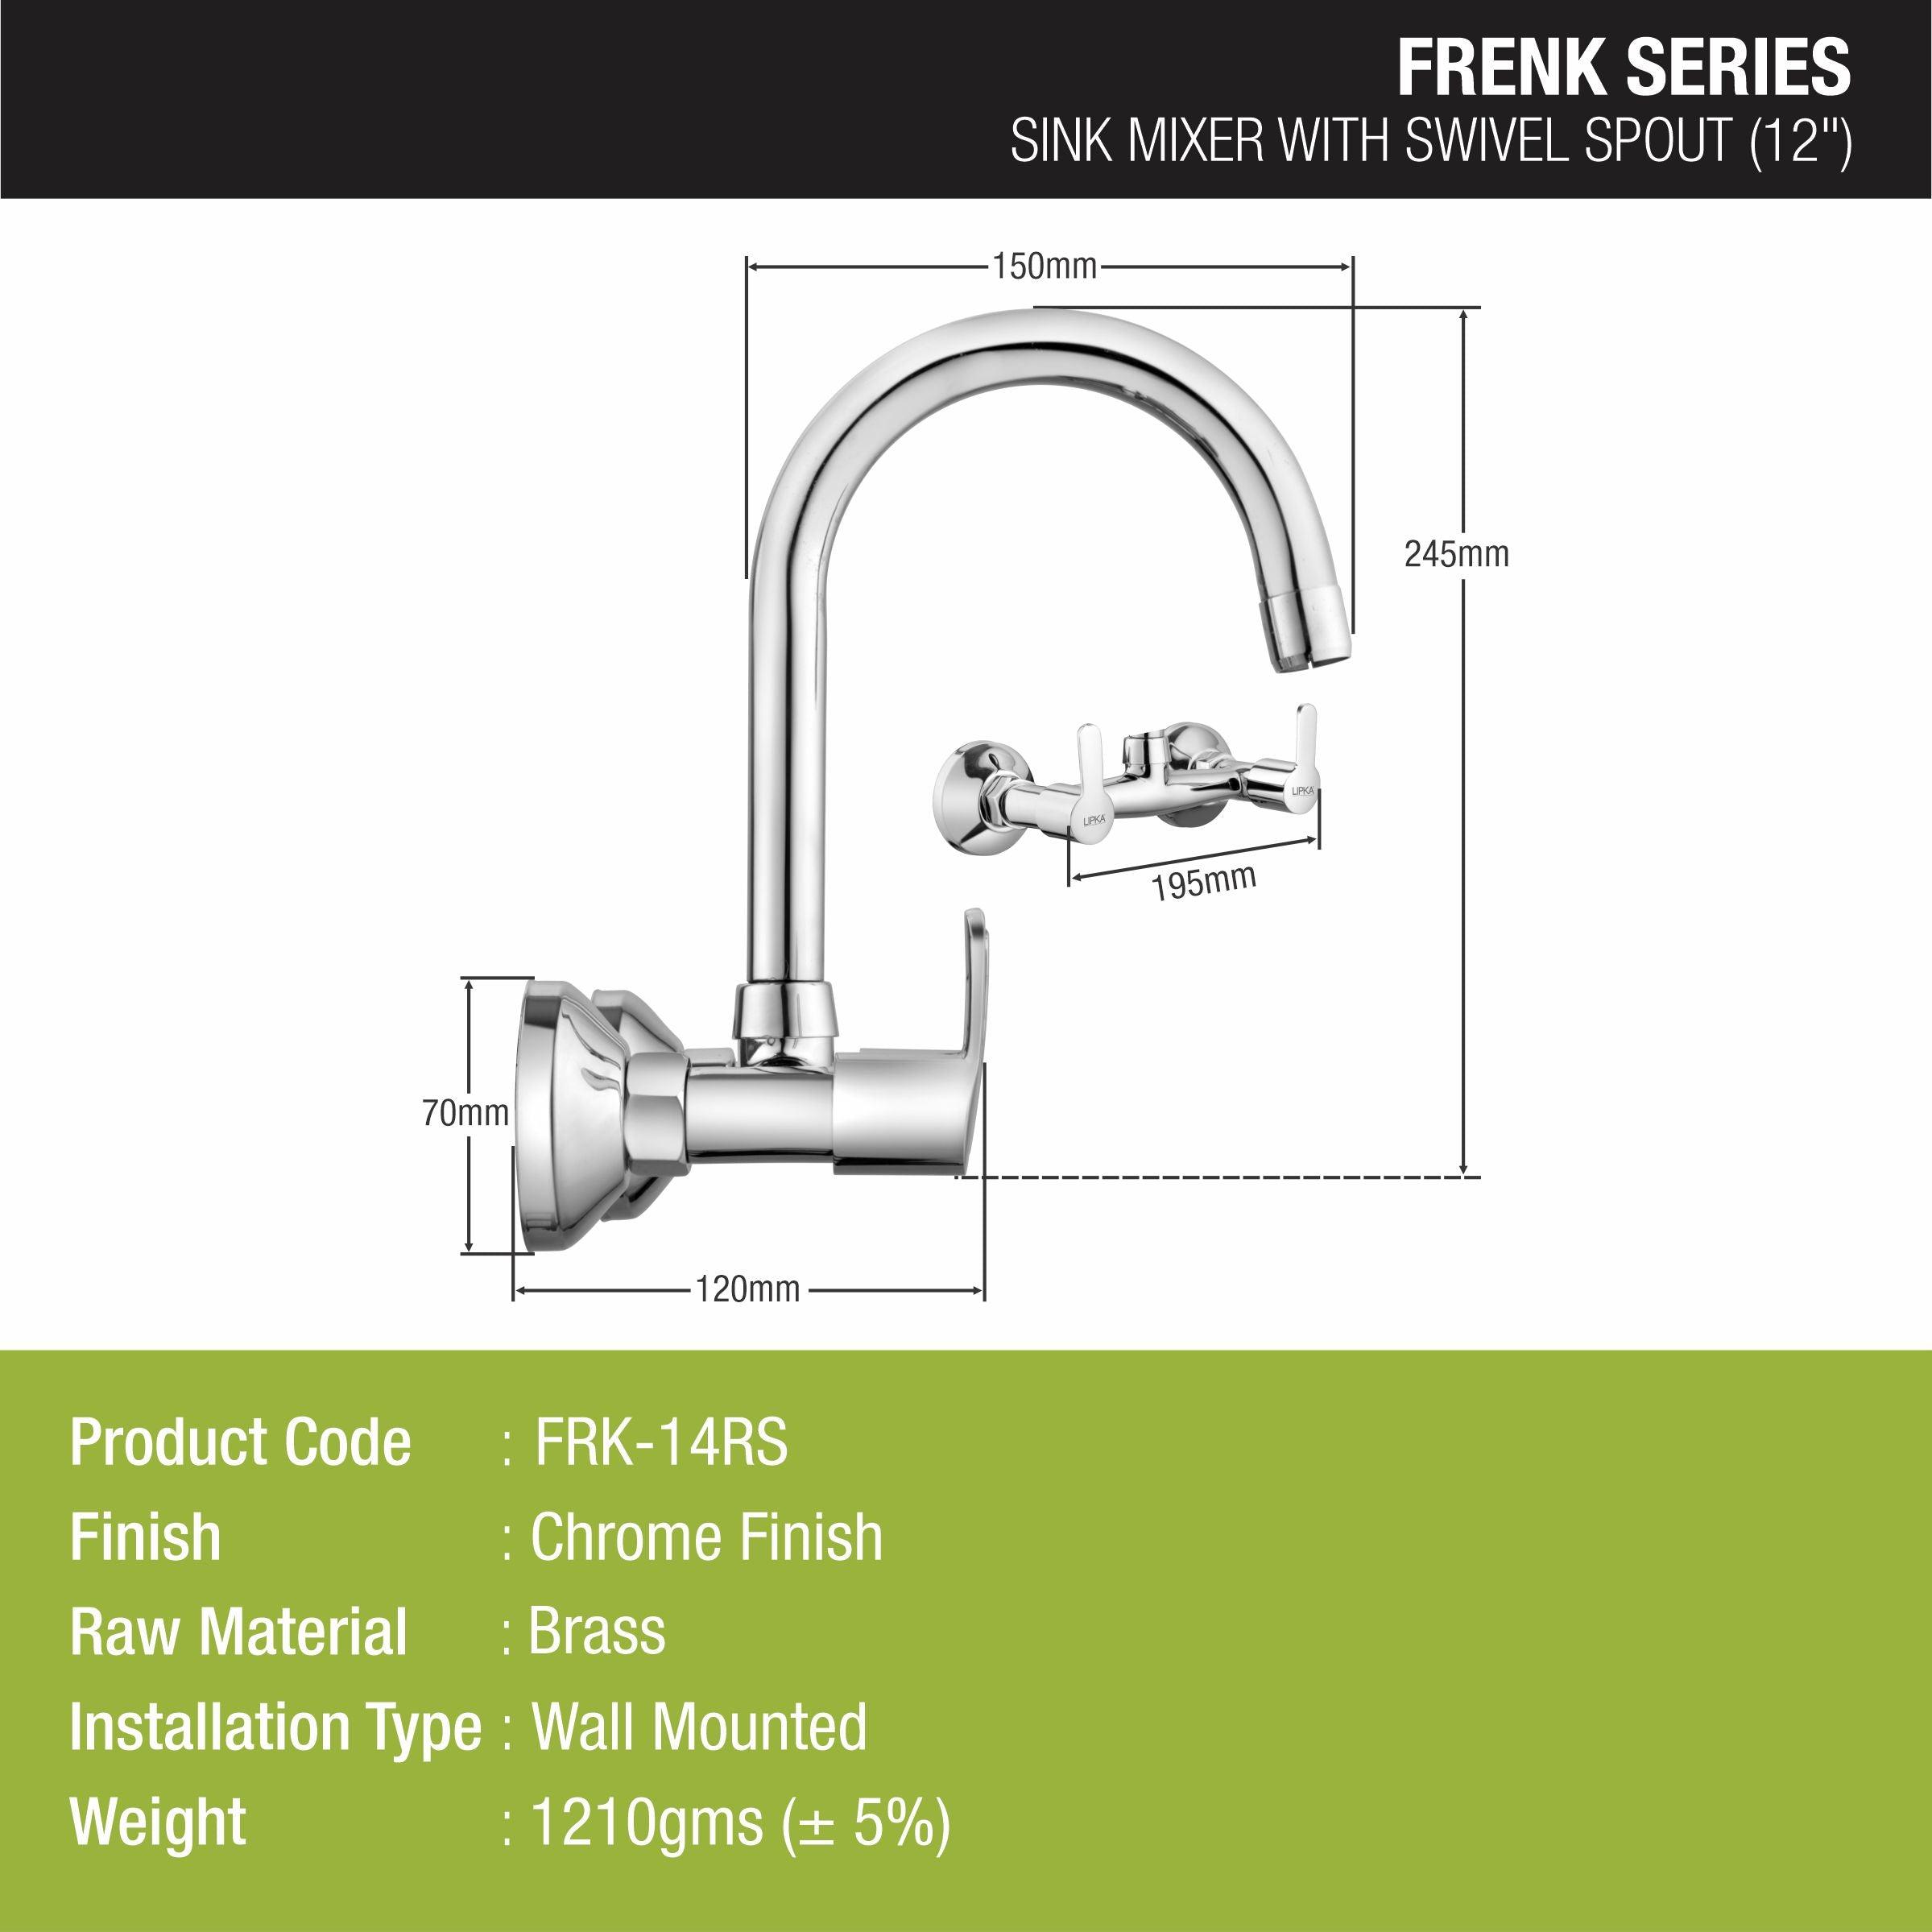 Frenk Sink Mixer Brass Faucet with Round Swivel Spout (12 Inches) sizes and dimensions